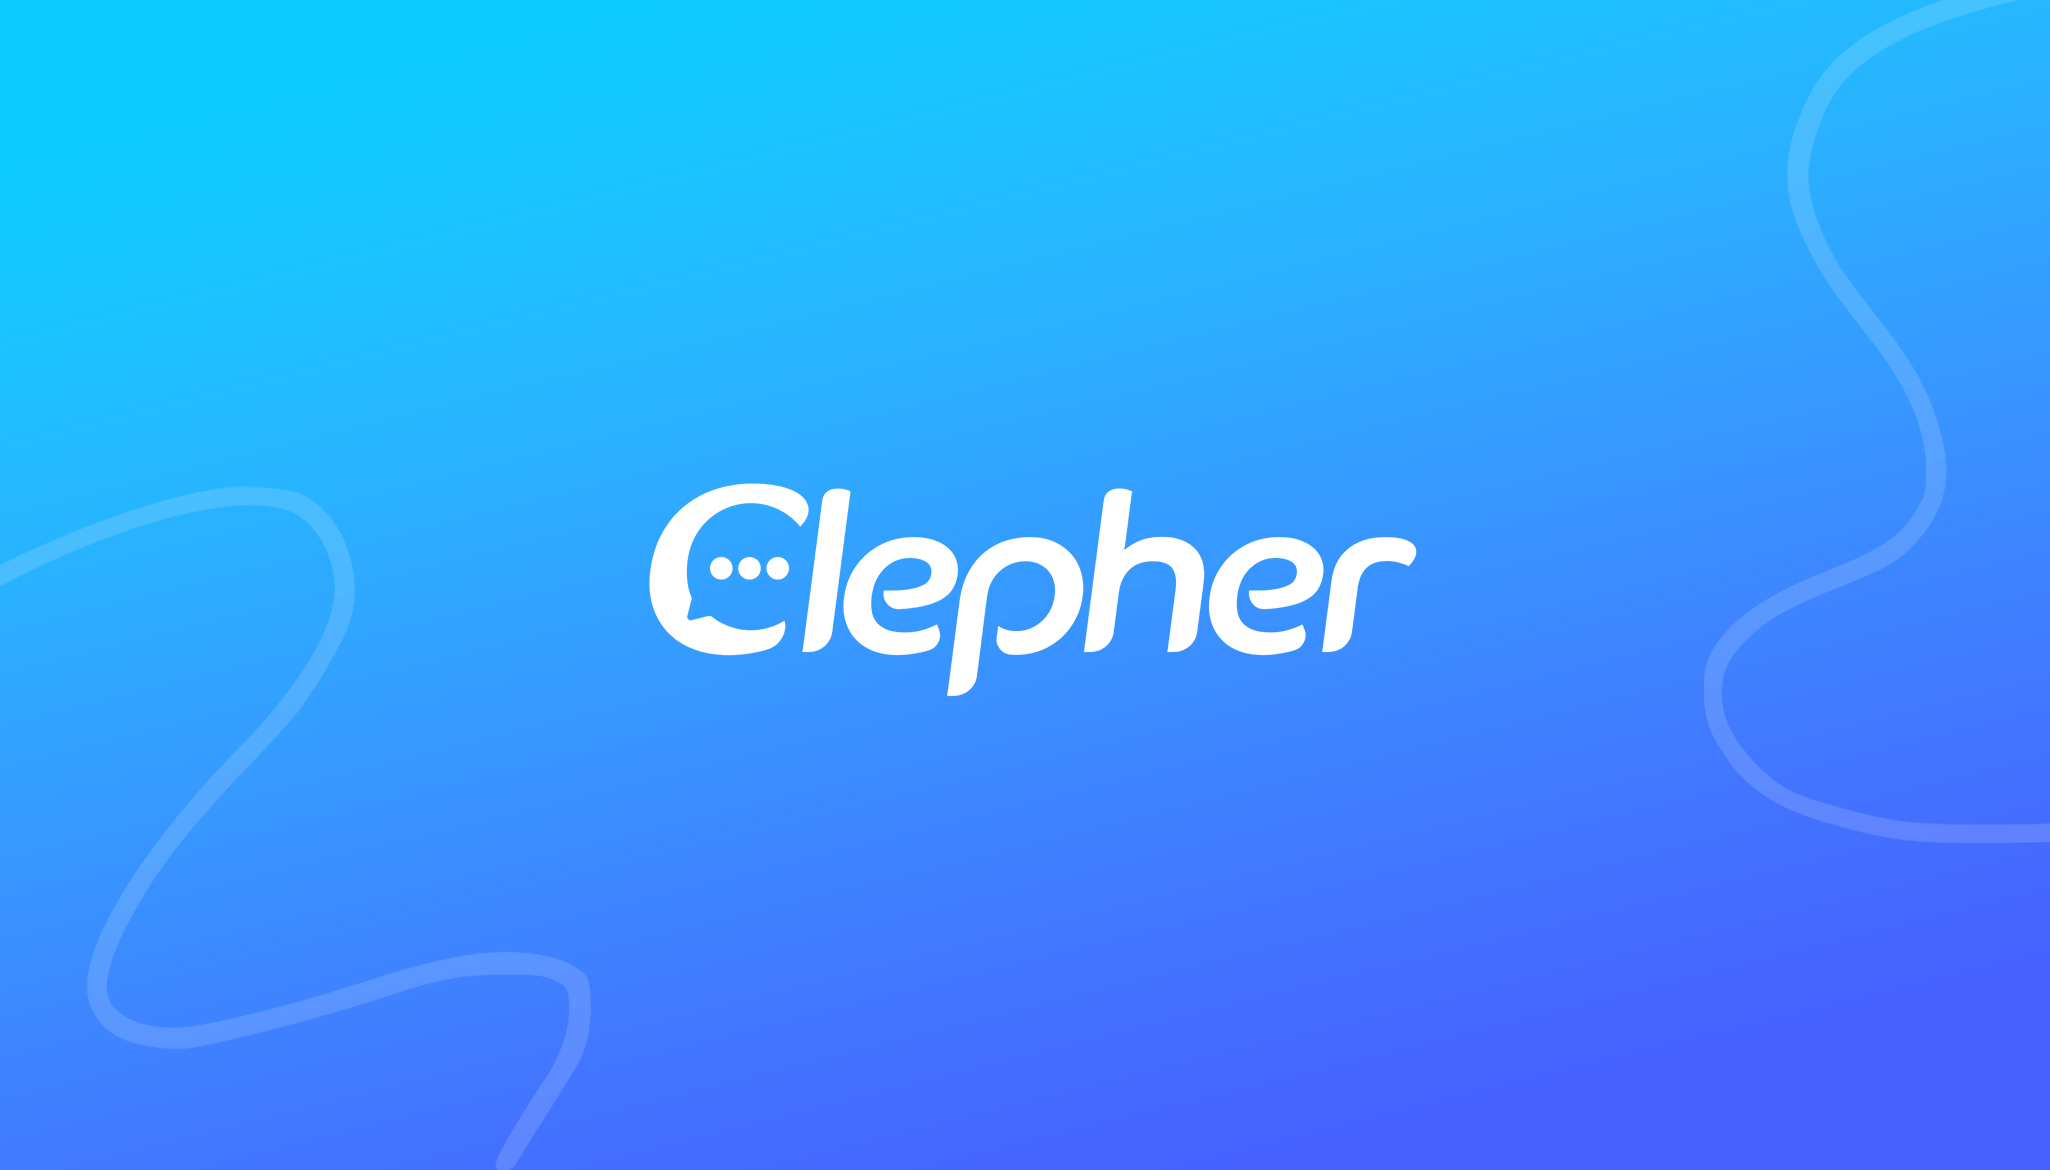 Click Here to Start Using Clepher and Integrate DropCowboy